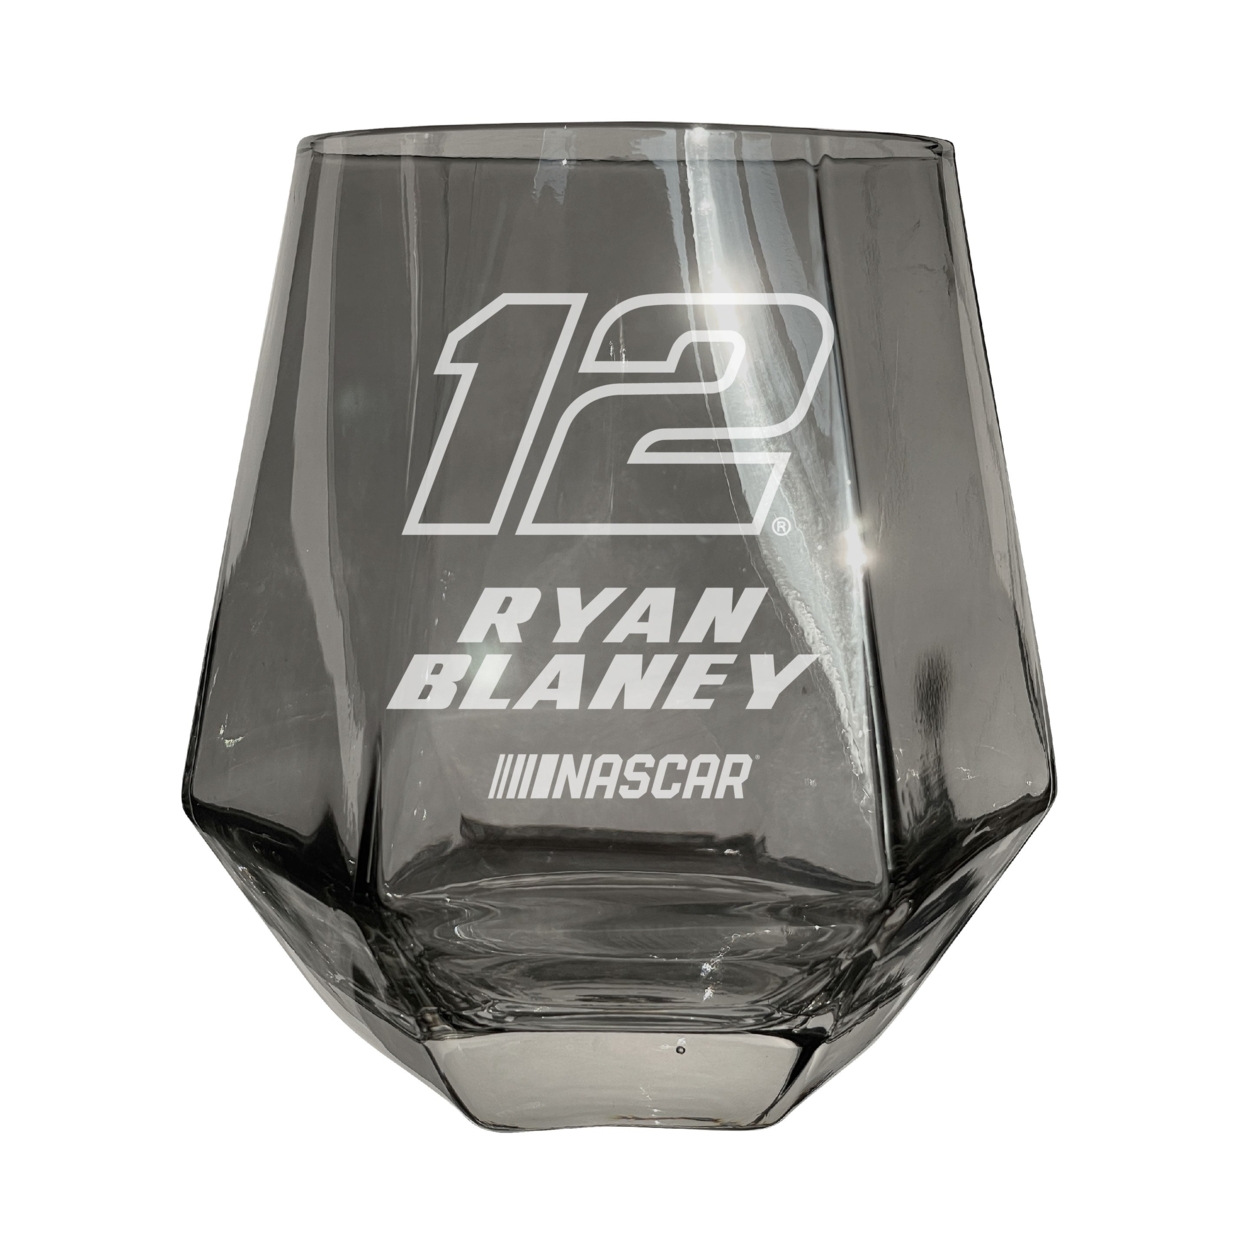 #12 Ryan Blaney Officially Licensed 10 Oz Engraved Diamond Wine Glass - Clear, Single